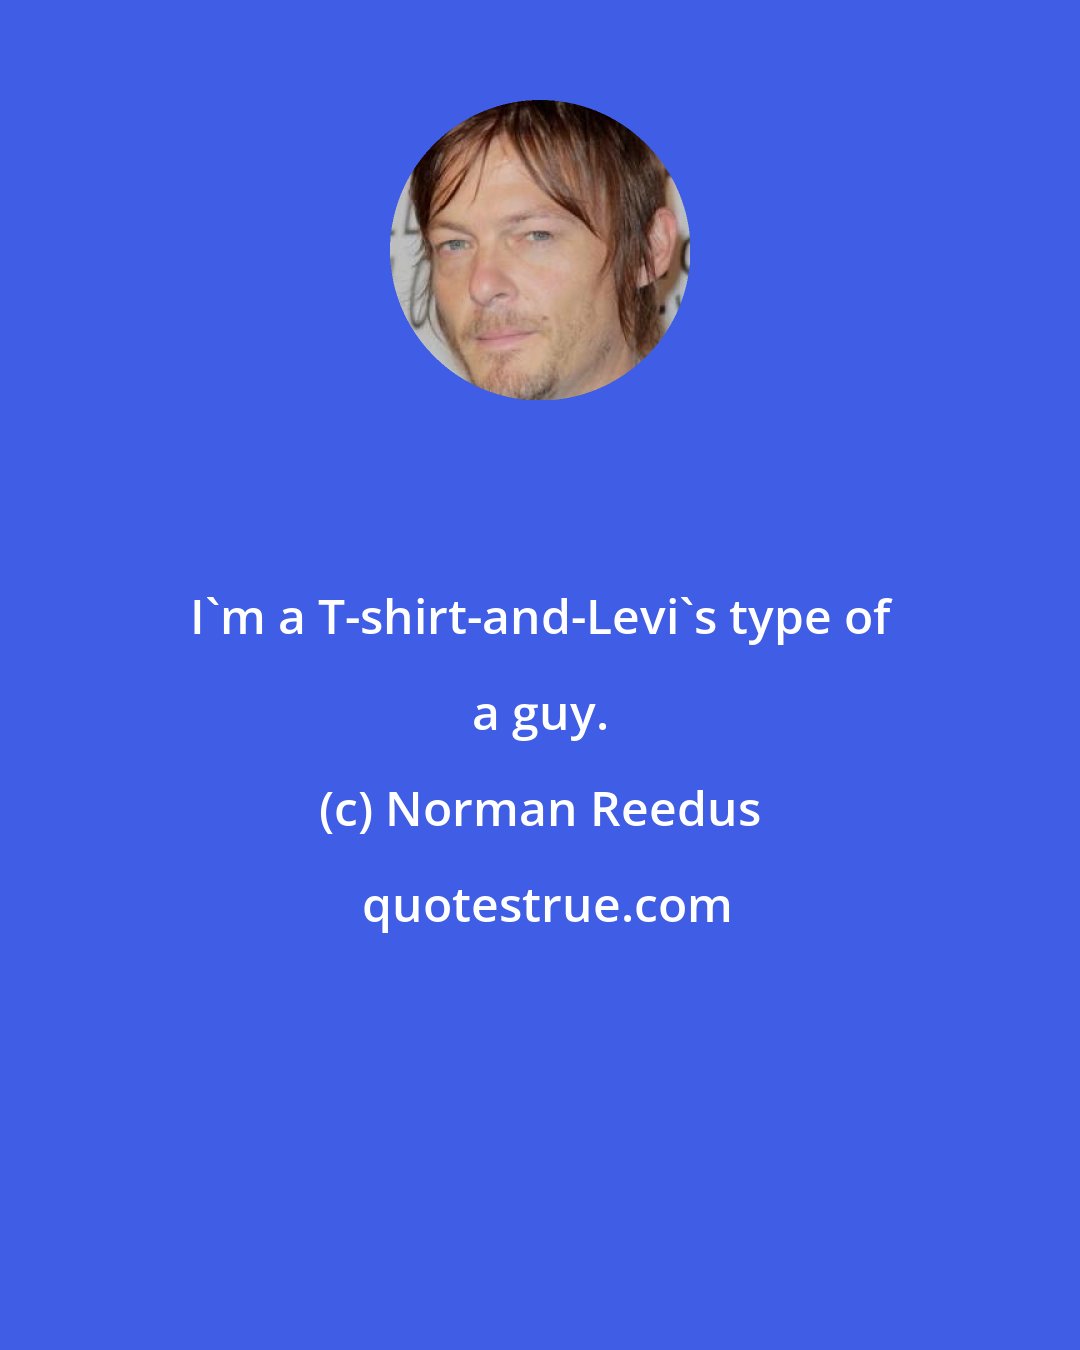 Norman Reedus: I'm a T-shirt-and-Levi's type of a guy.